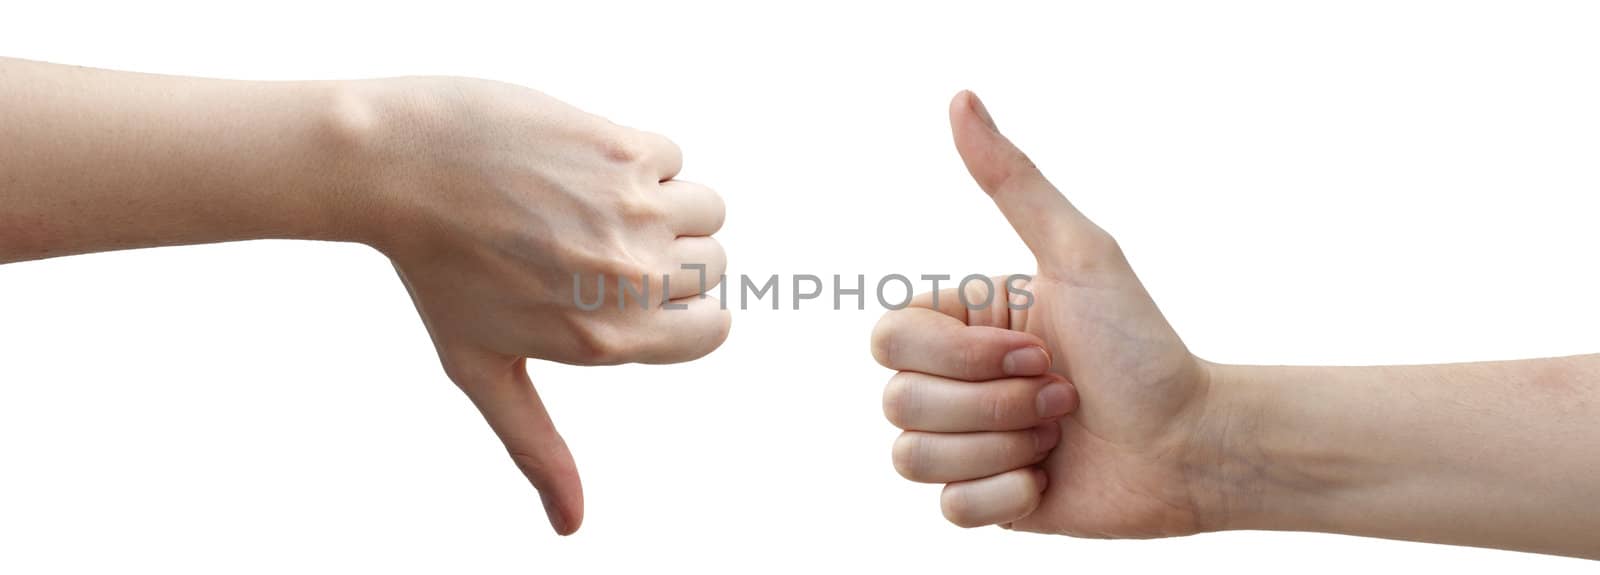 Human hands on the white background